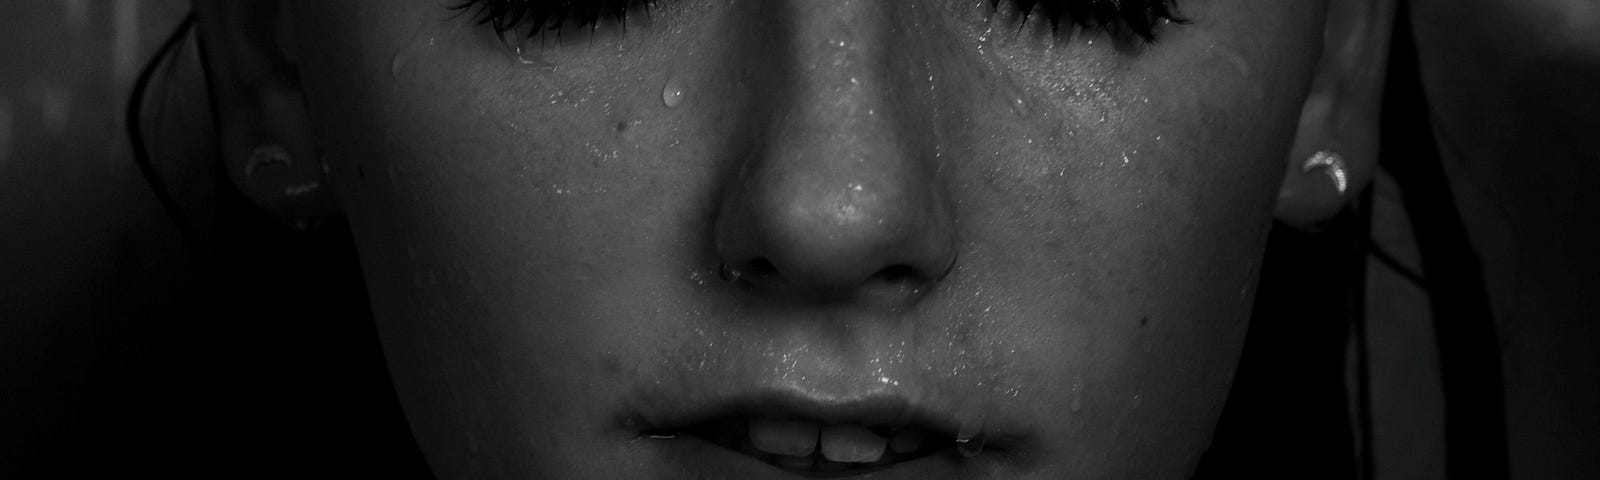 Grayscale photography of topless woman with water drops on face